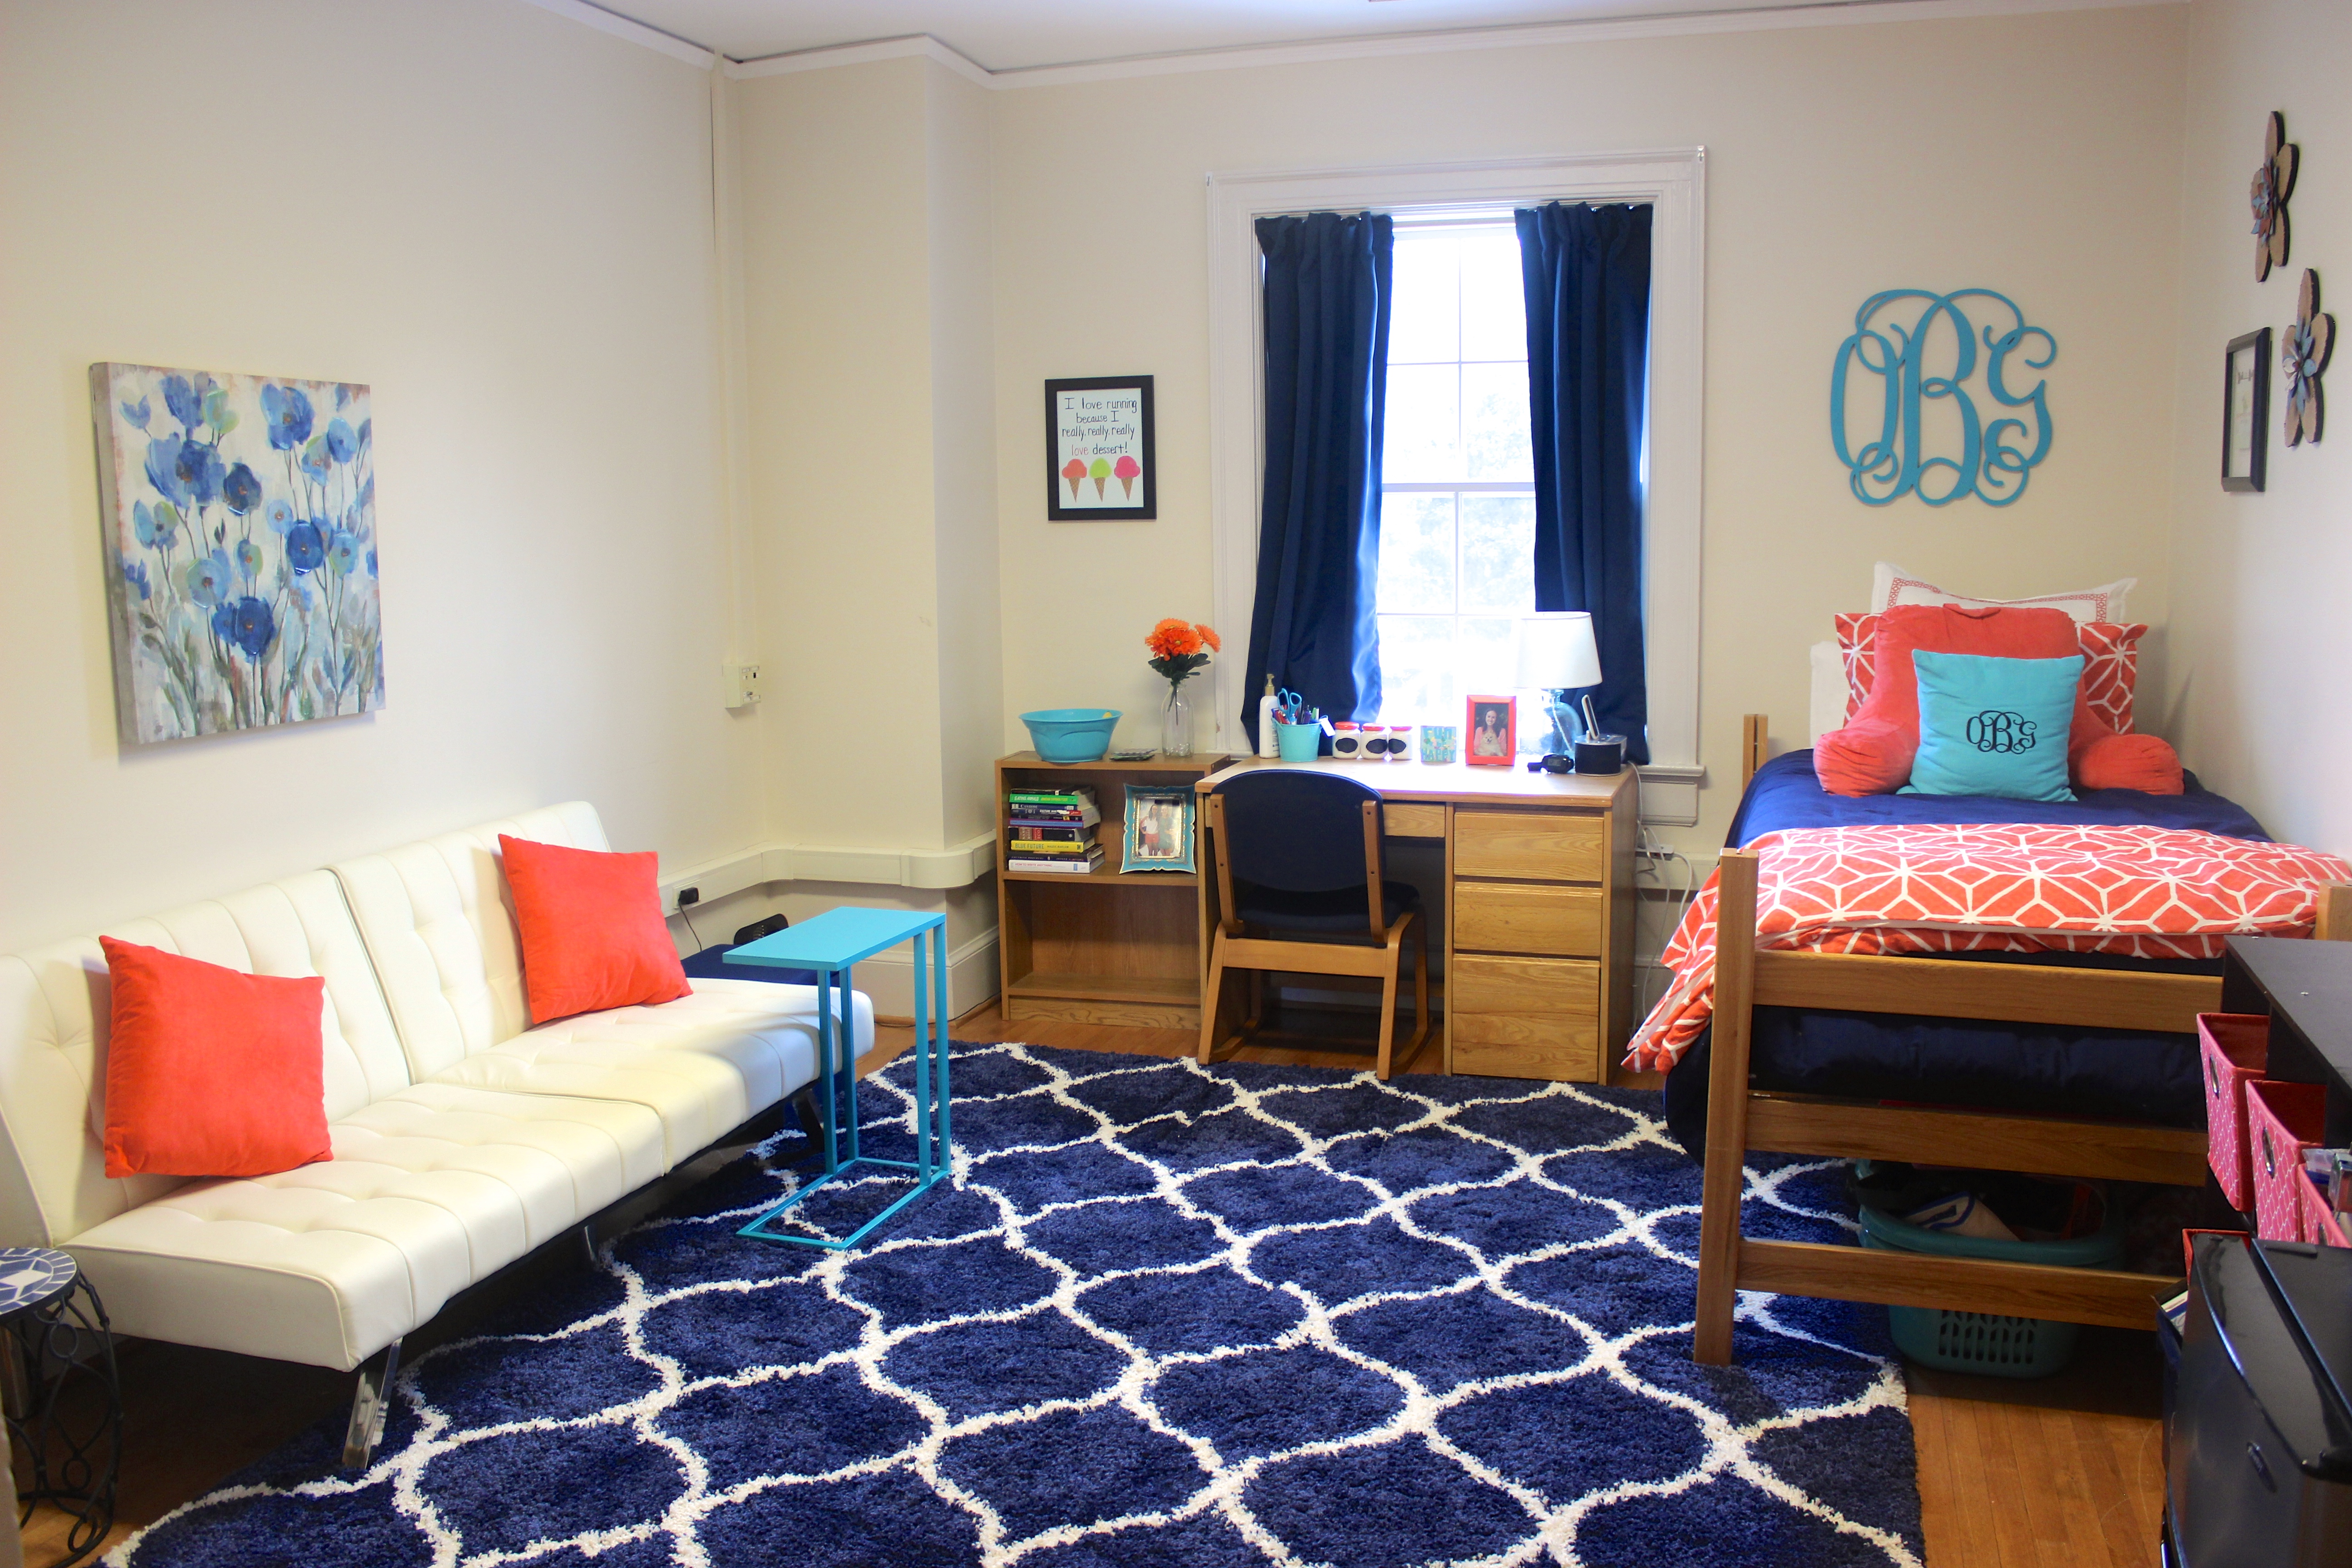 Cost-Saving Tips to Outfit Your Dorm Room